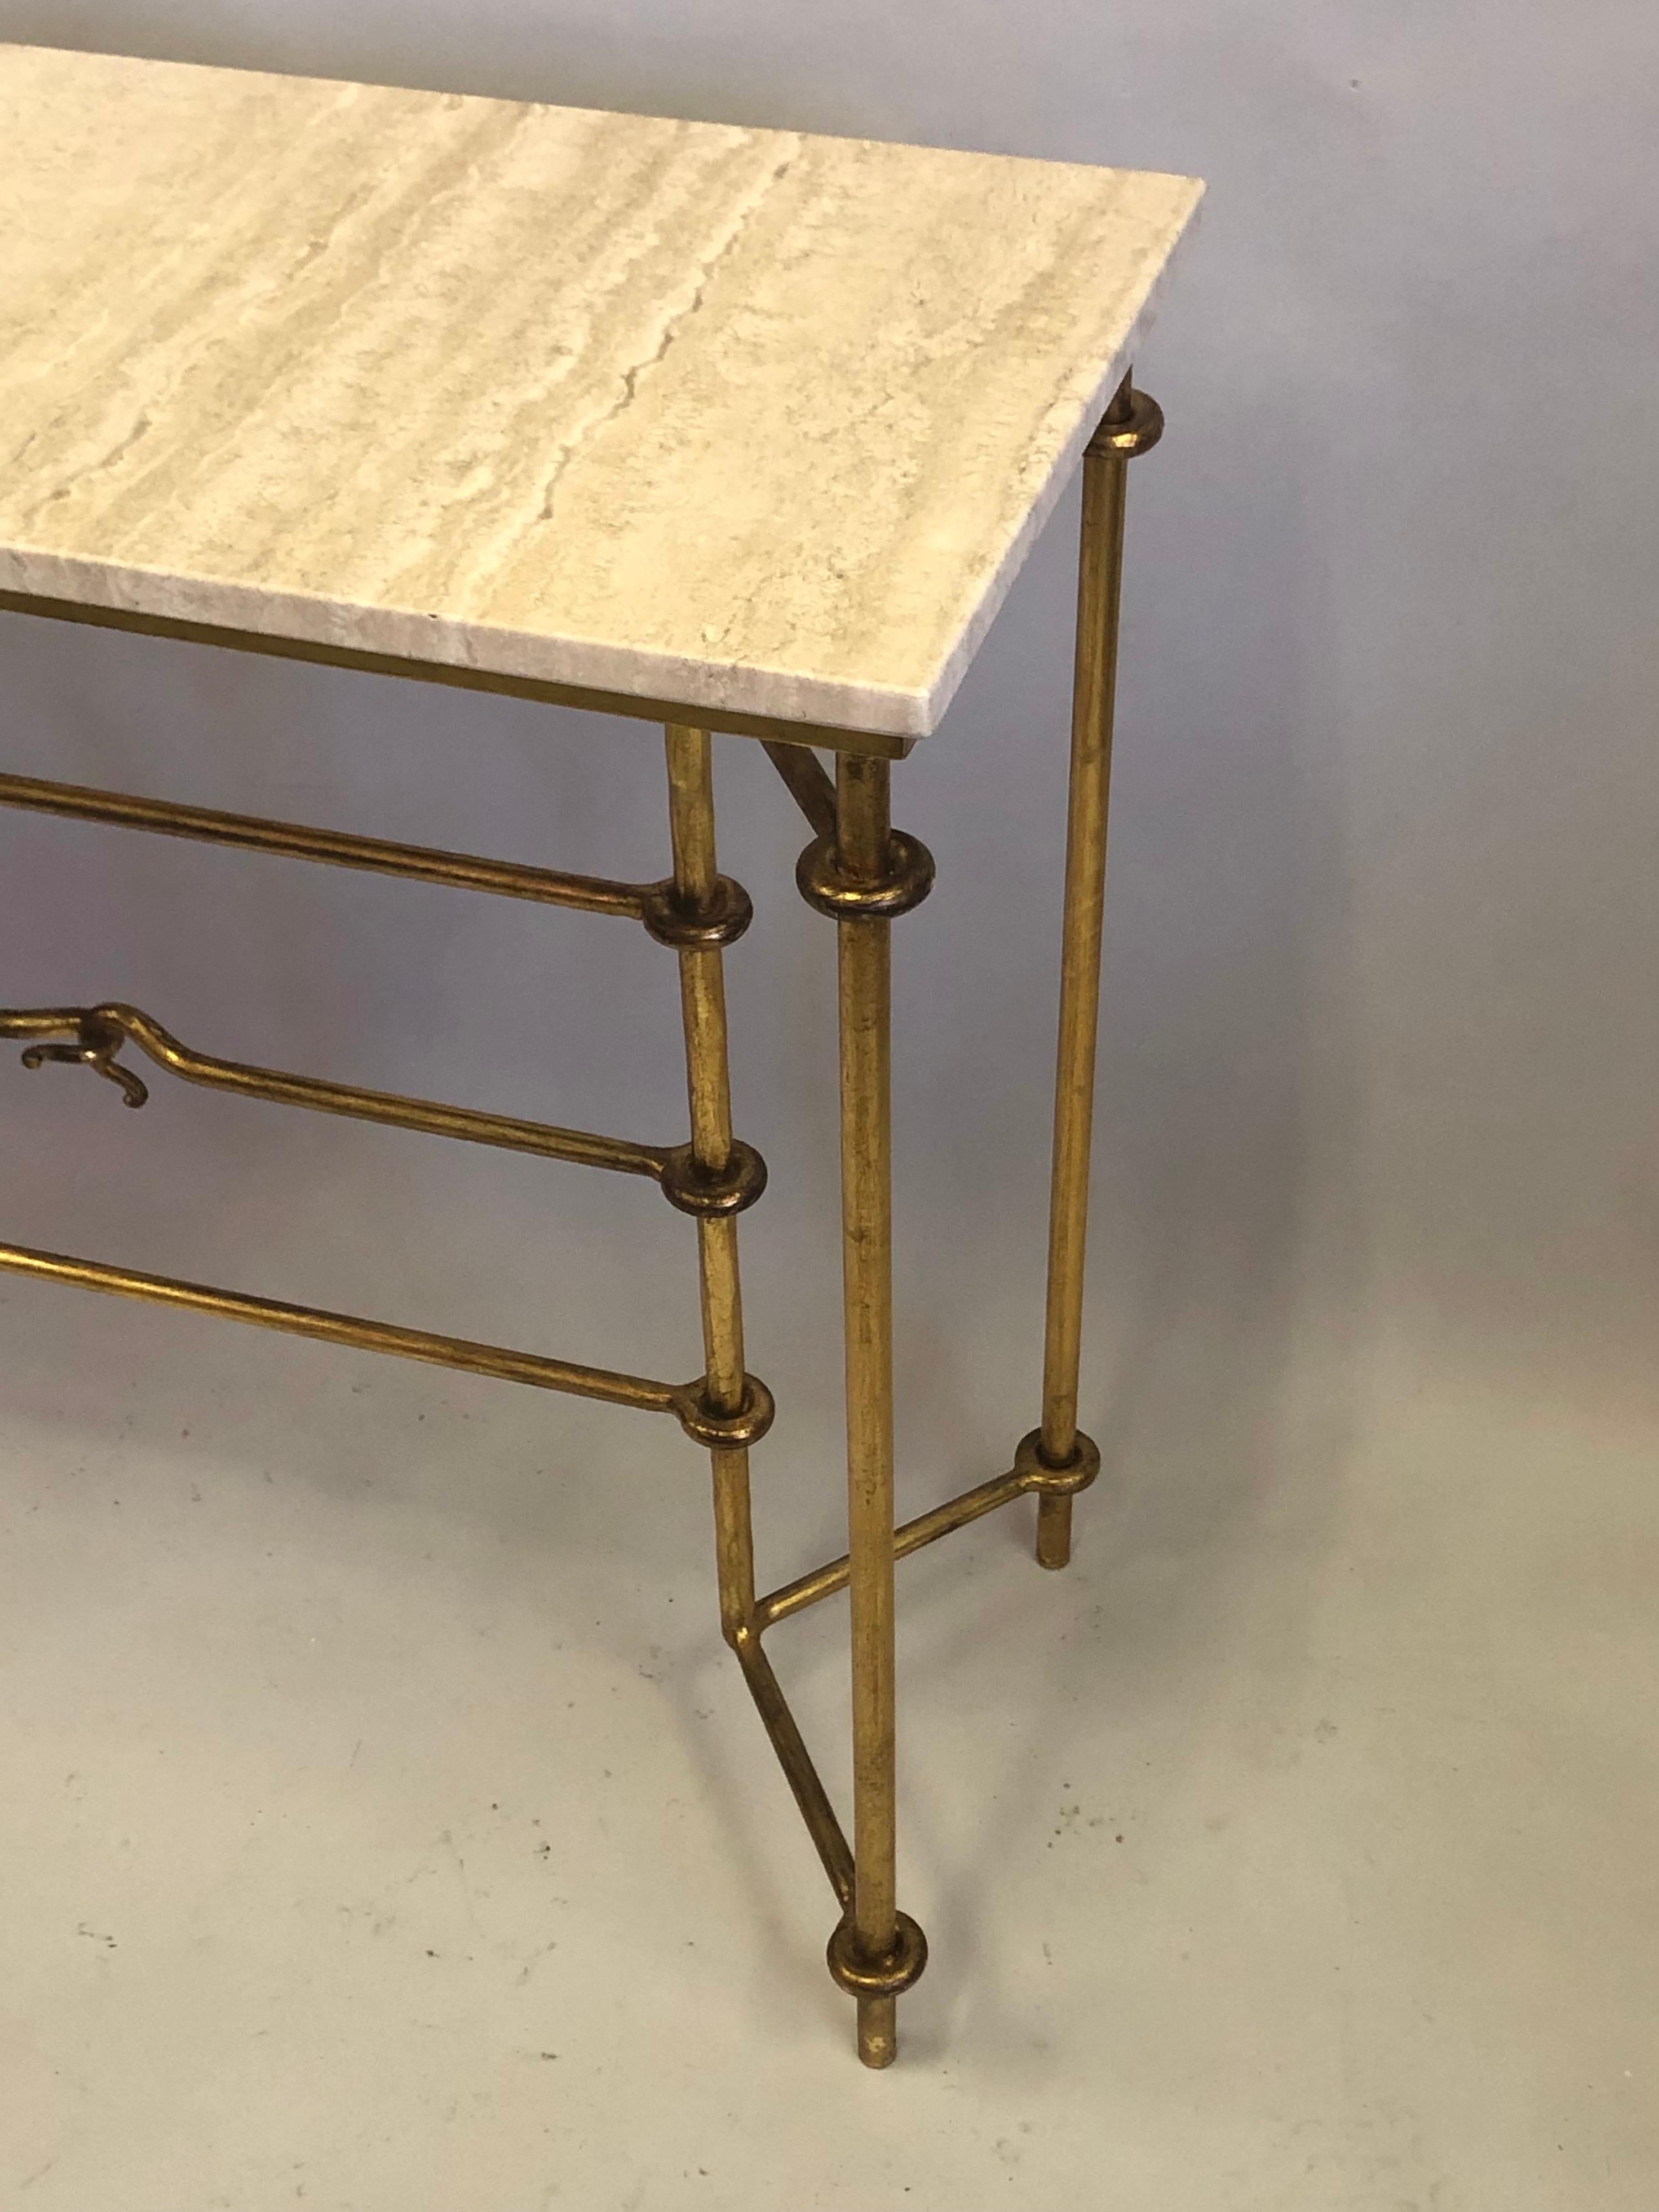 Italian Mid-Century Modern Neoclassical Gilt Iron Console by Banci for Hermès For Sale 1